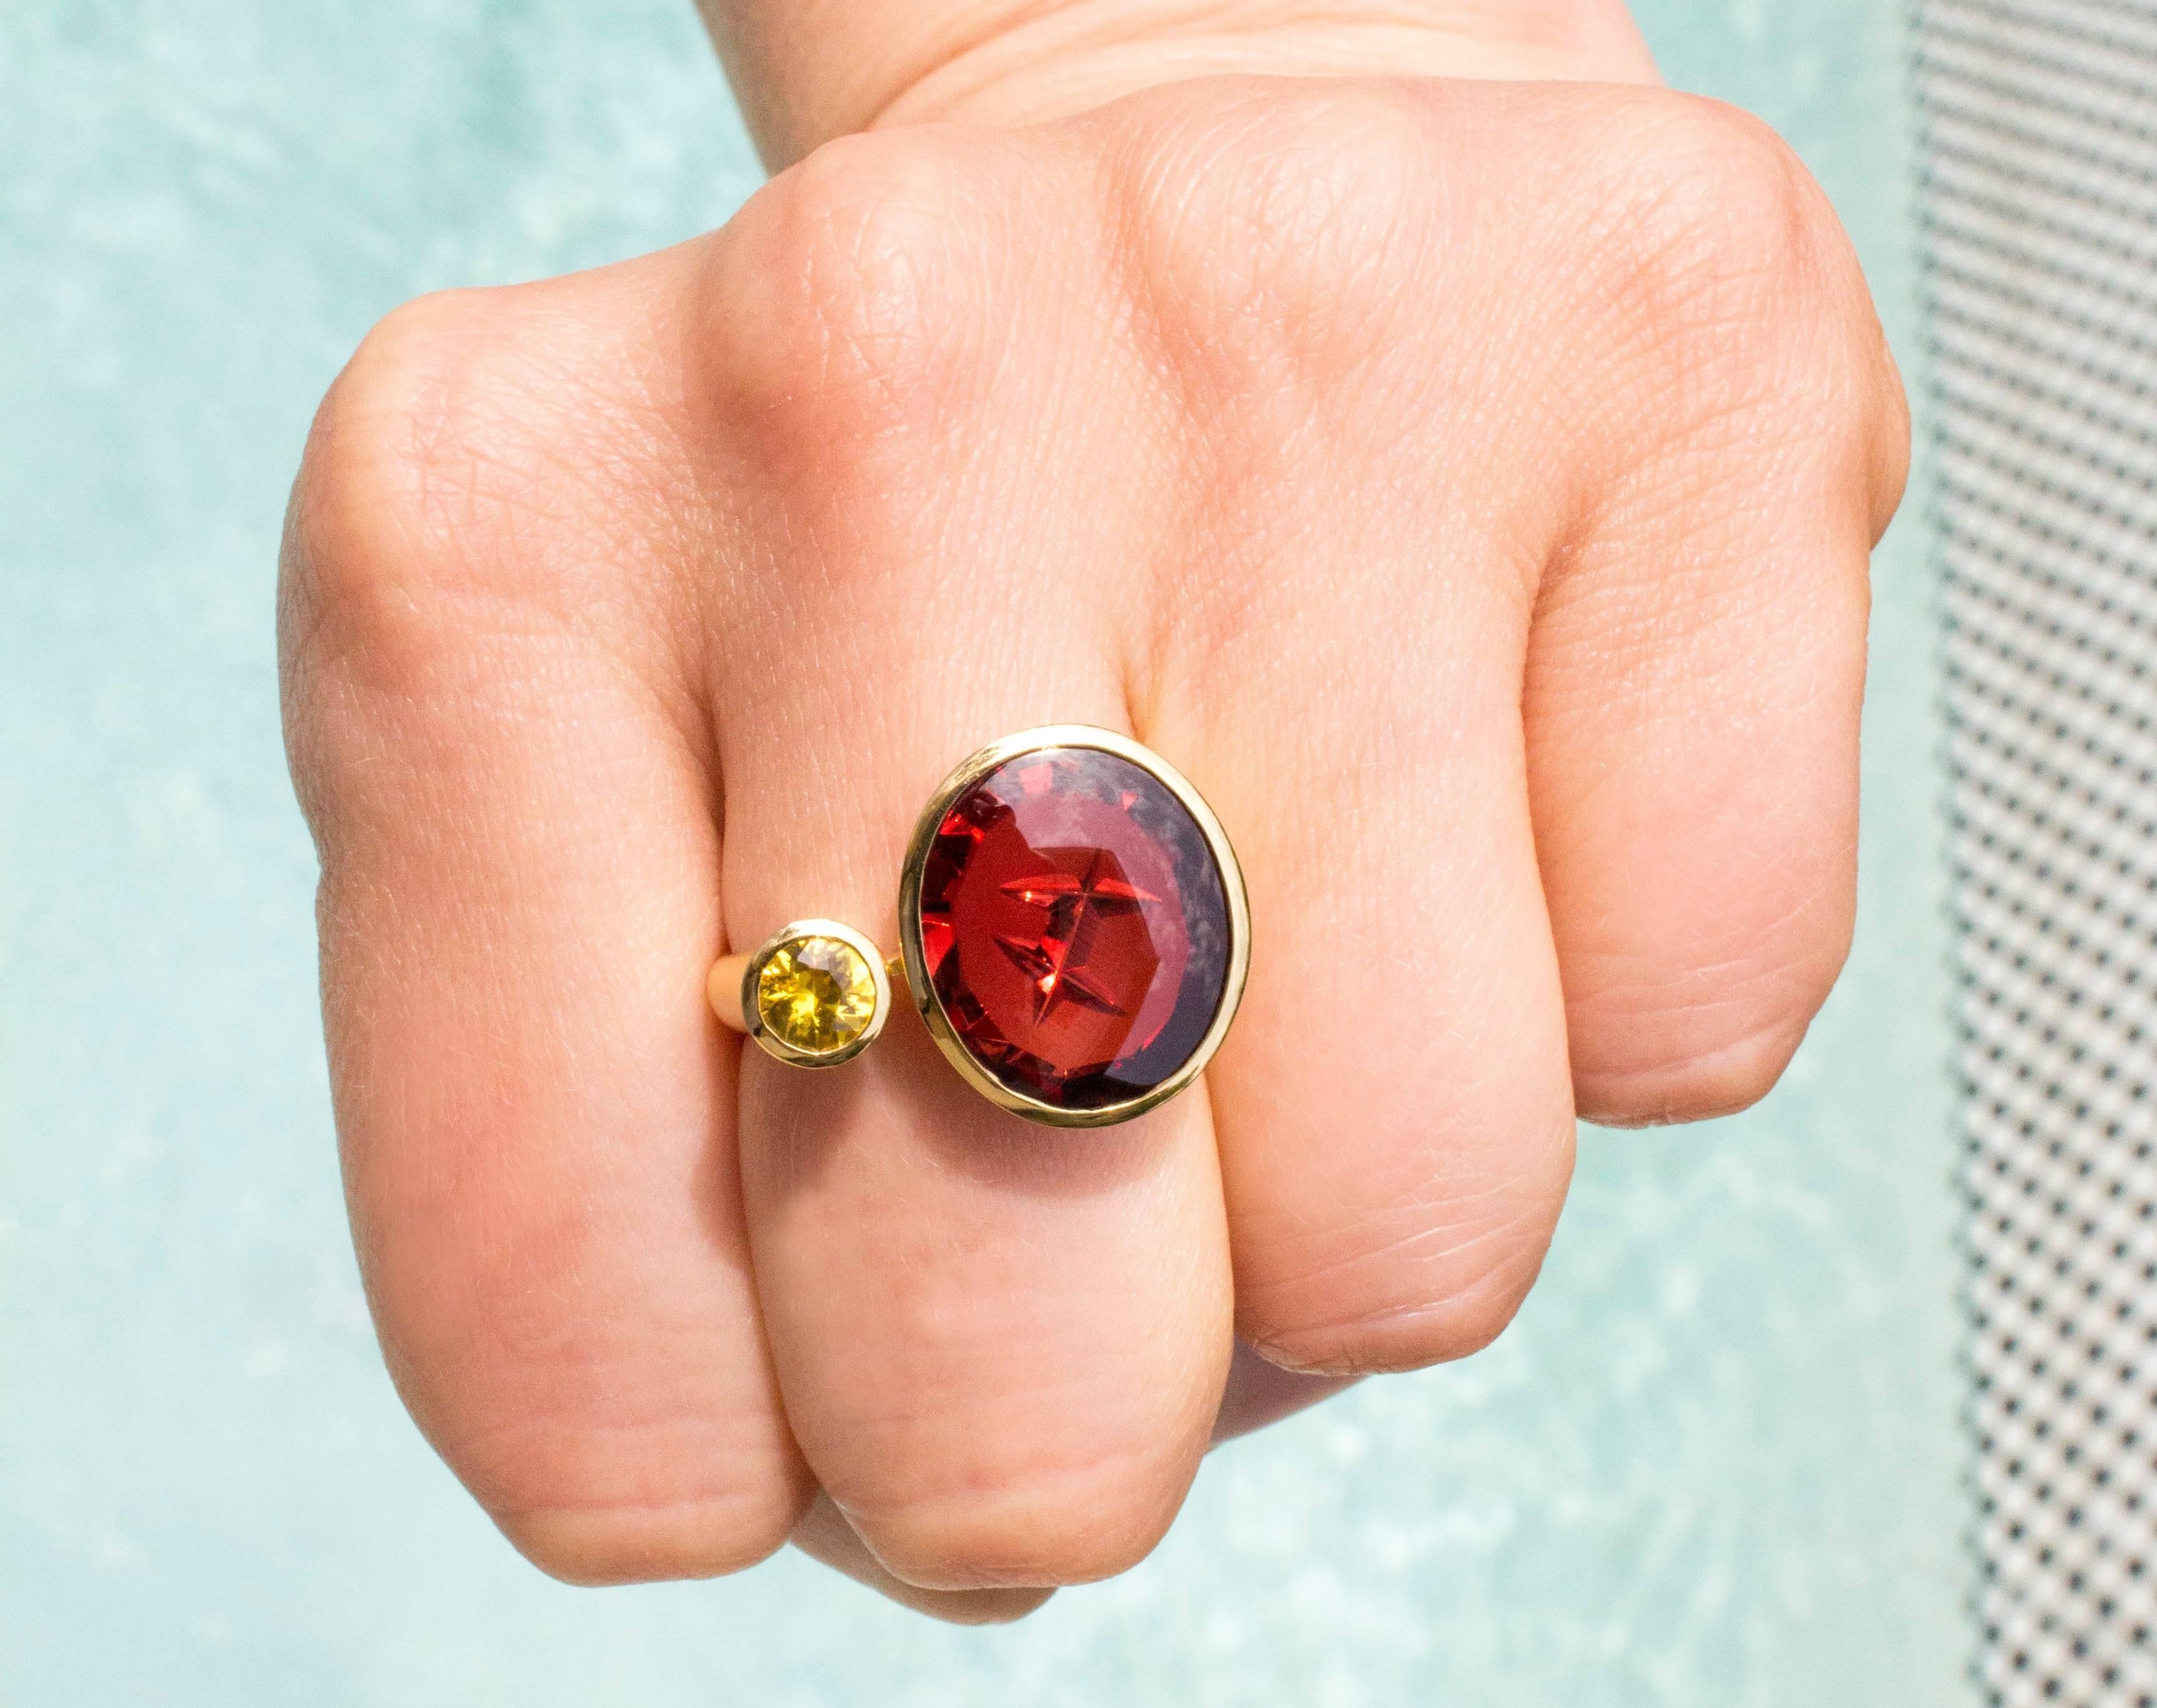 One-of-a-Kind Ring handcrafted in Germany in satin-finished 18k yellow gold by world-renowned Atelier Munsteiner in Germany, featuring a spectacular 6.41 carat custom-cut spessartine garnet and 0.43 carat shimmering yellow sapphire (0.43tcw). Size